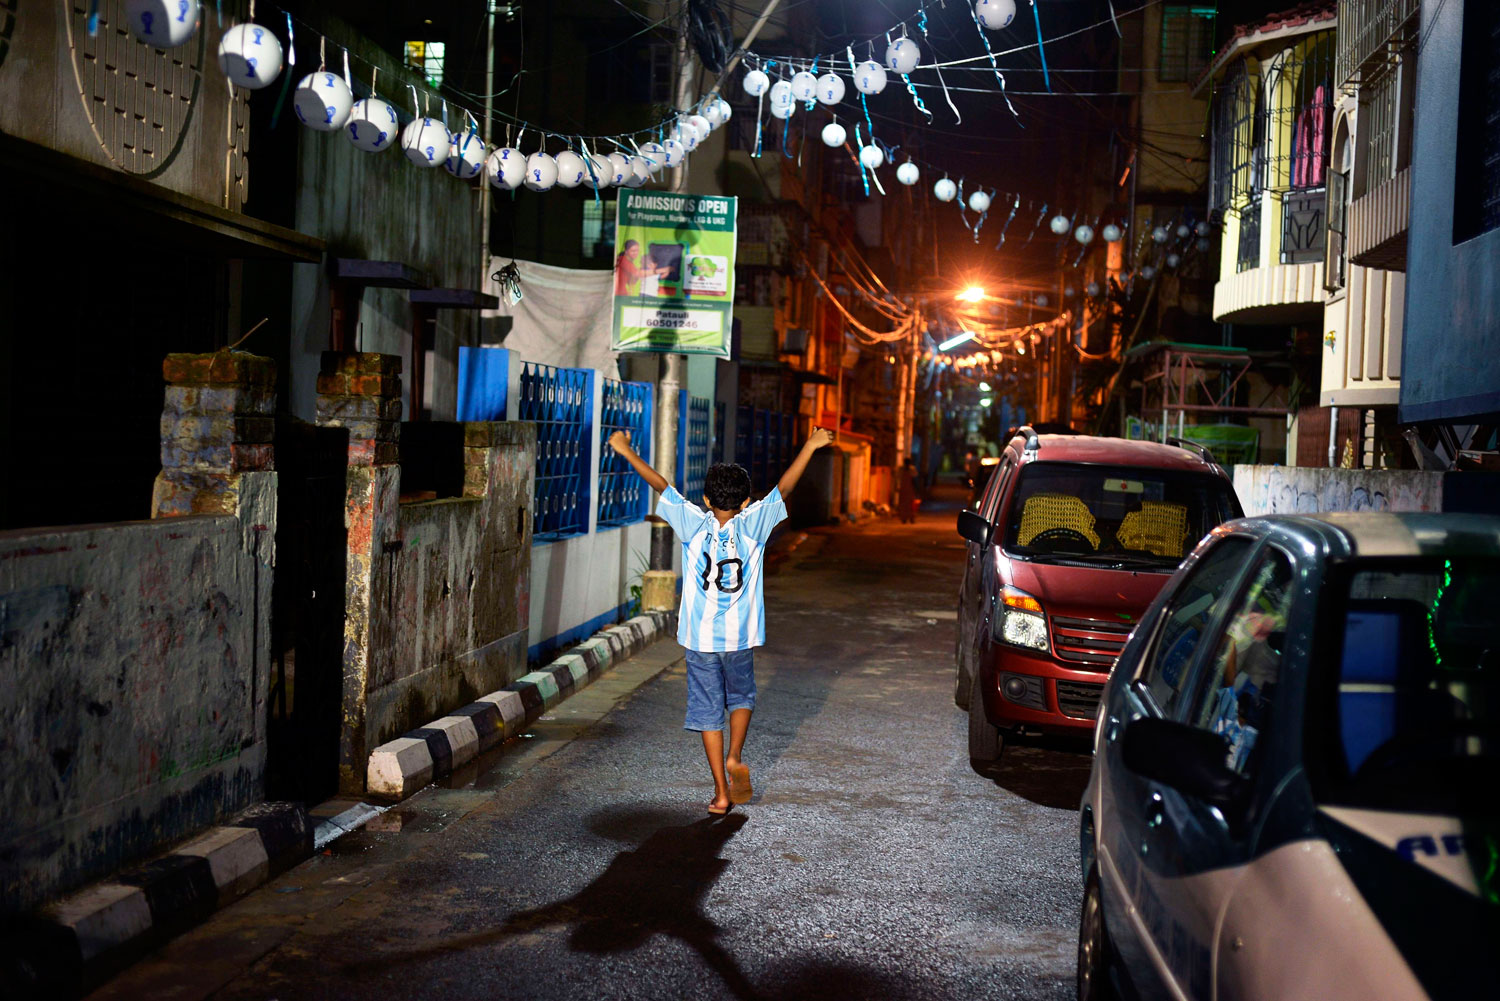 A young Indian football fan of Argentina in a Lionel Messi shirt walks back home after watching the Argentina-Iran match on a giant screen in Kolkata.